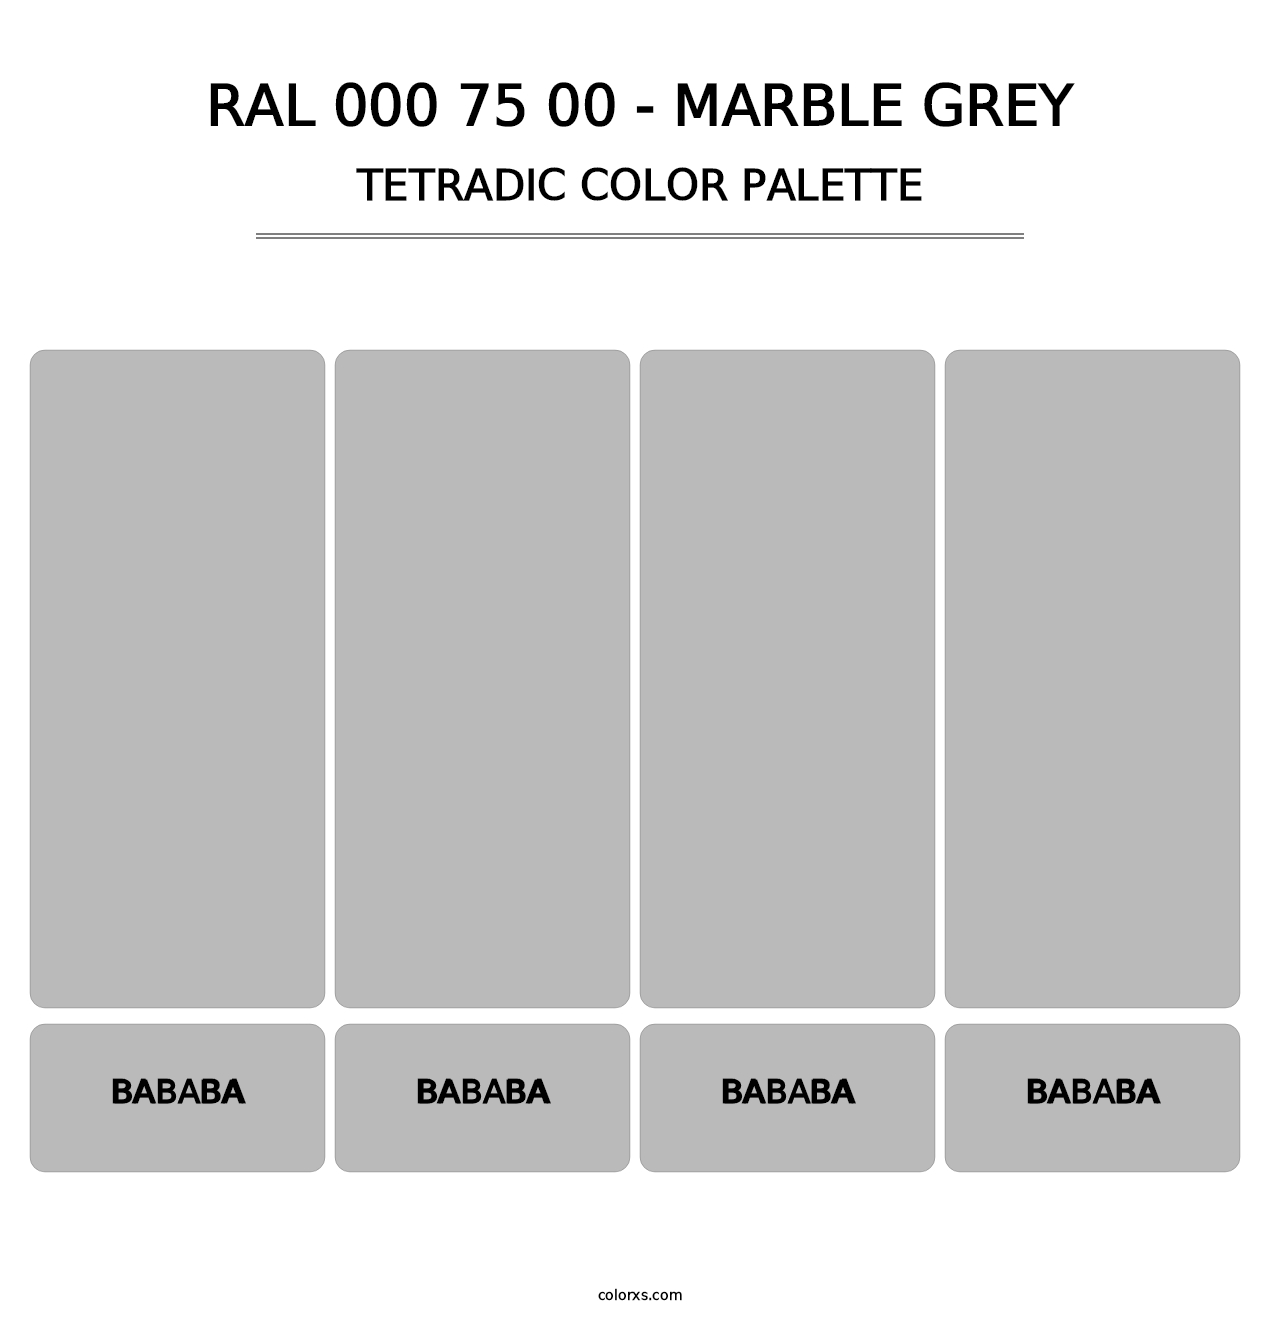 RAL 000 75 00 - Marble Grey - Tetradic Color Palette